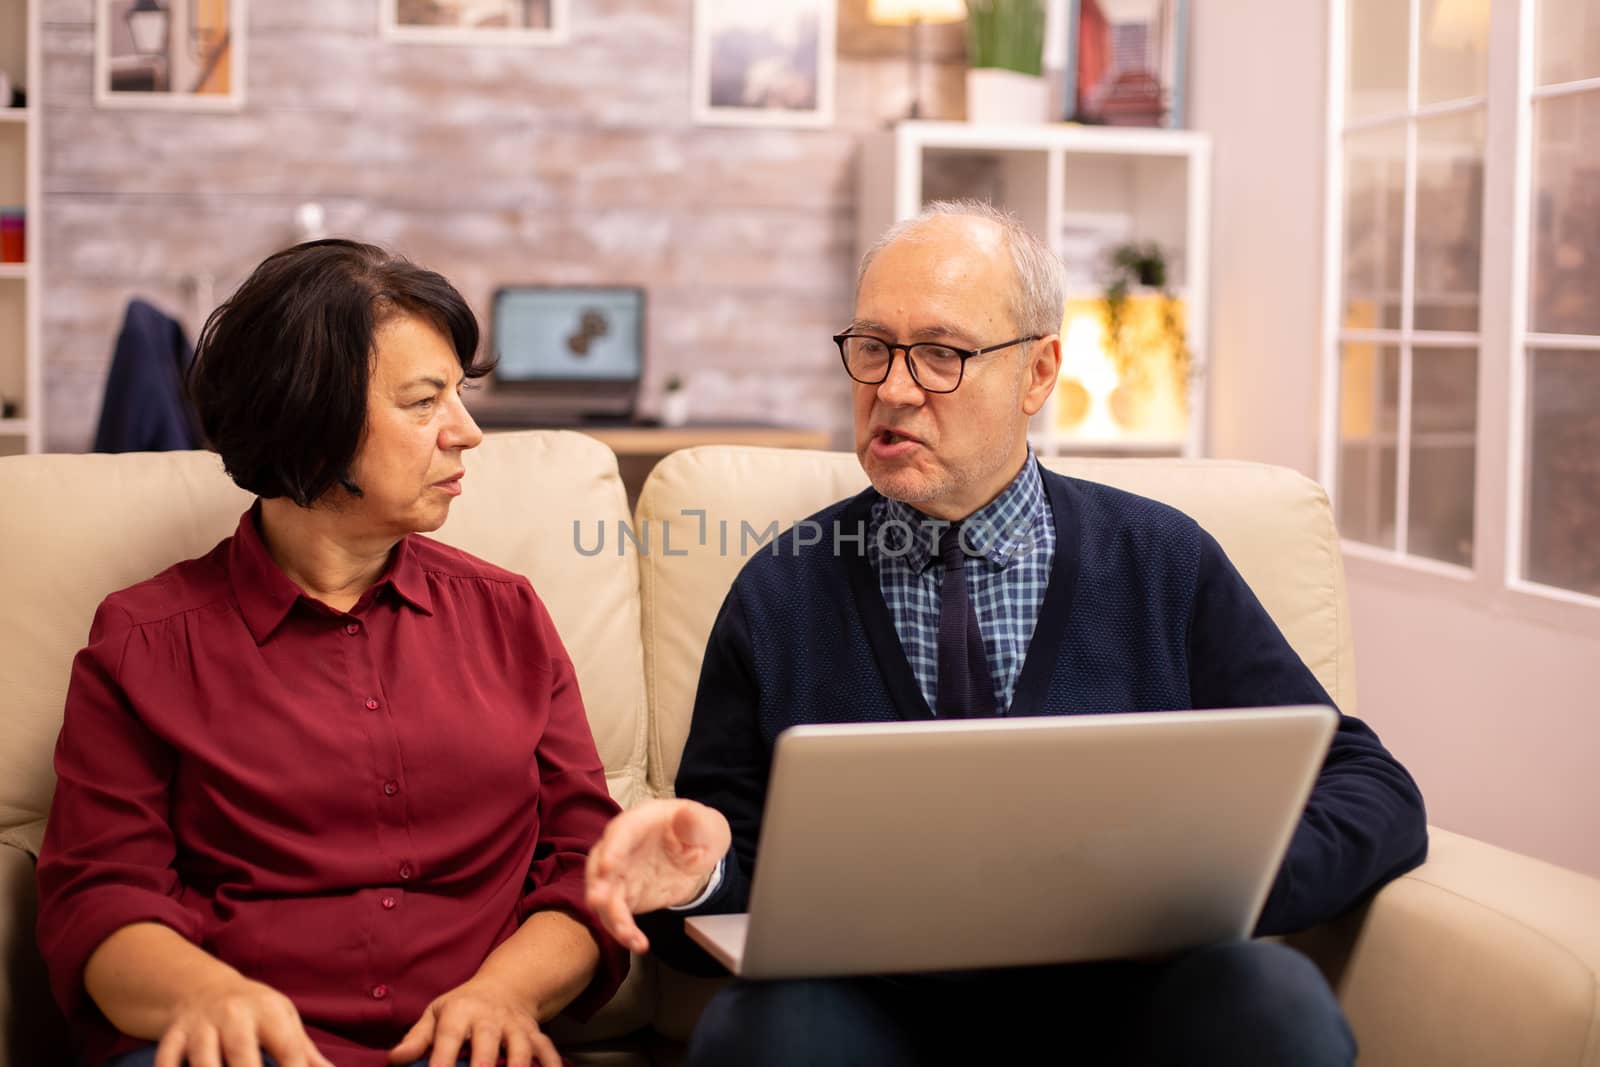 Elderly old couple using modern laptop to chat with their grandson. Grandmother and grandfather using modern technology